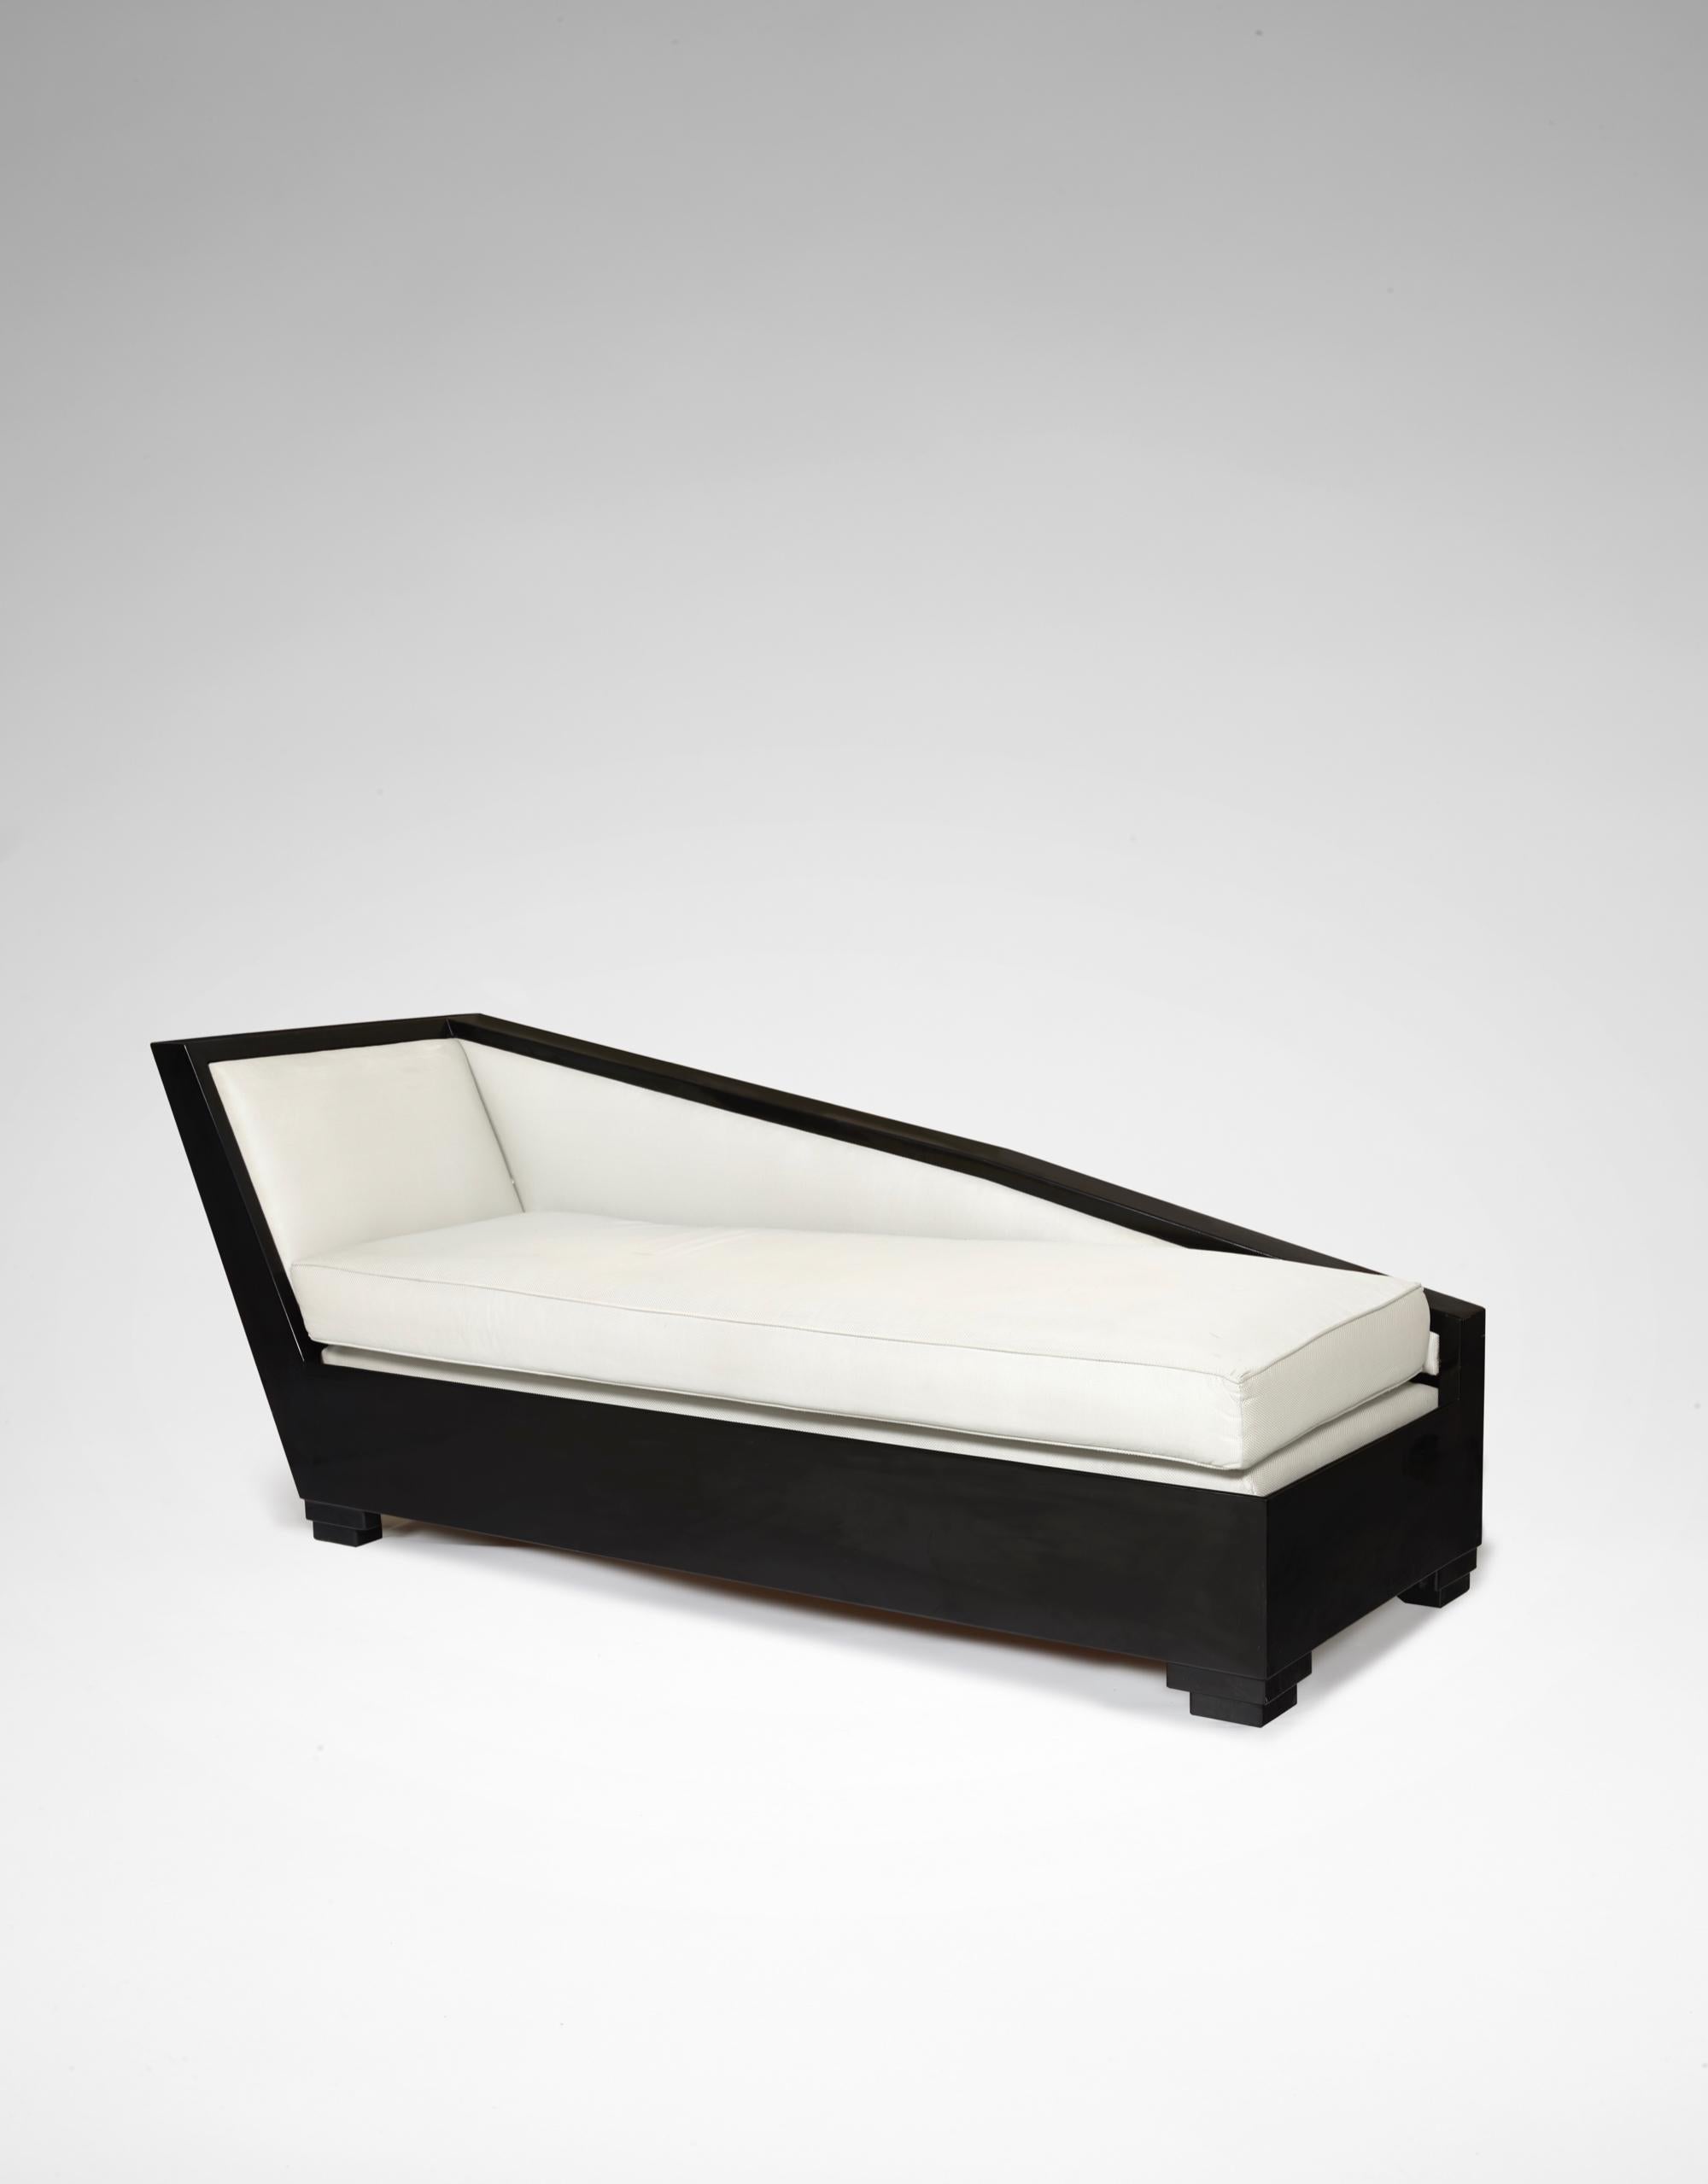 A Black lacquered wood daybed, small feet, covered with ivory colored fabric.